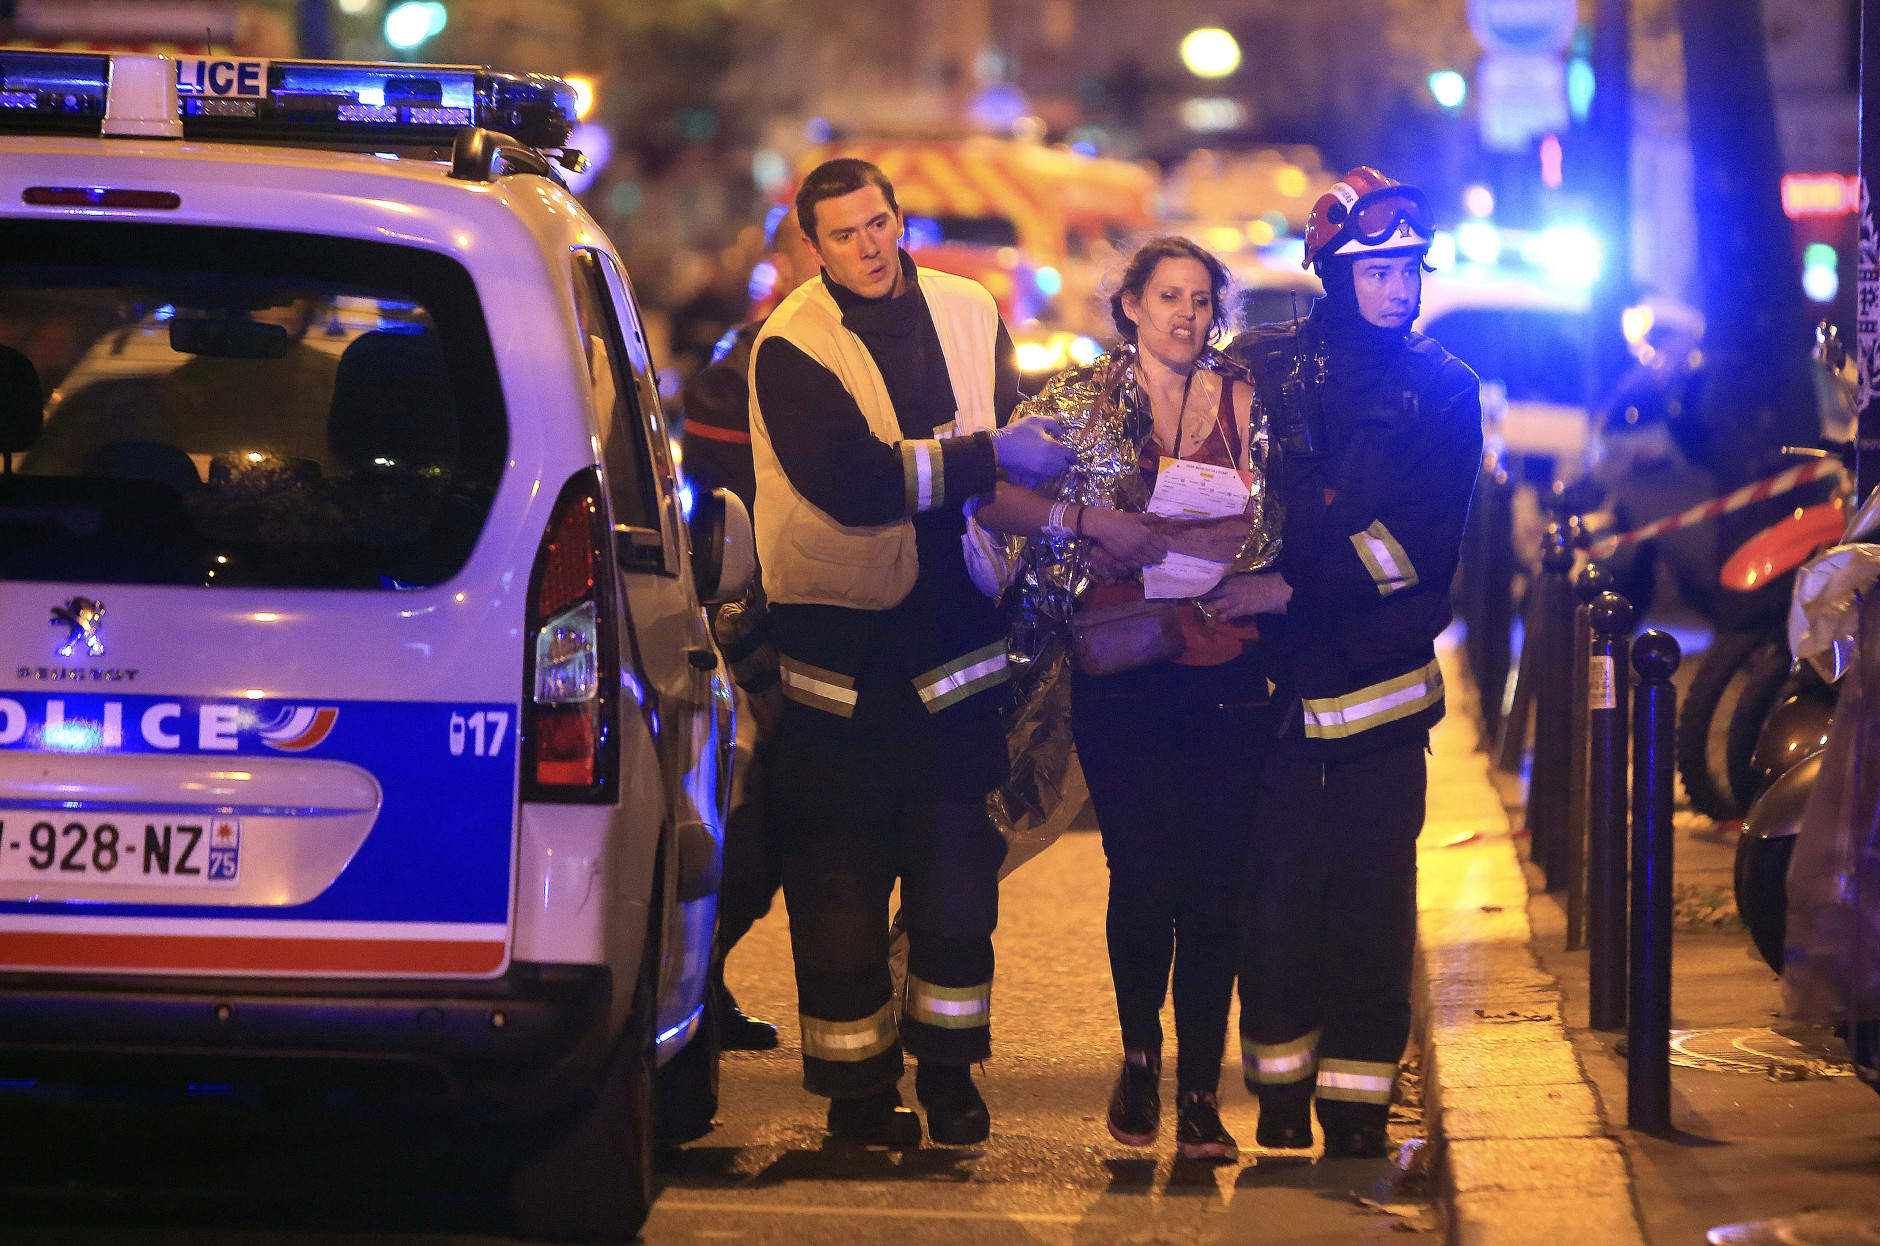 Rescue workers help a woman after a shooting, outside the Bataclan theater in Paris, Friday Nov. 13, 2015.  French President Francois Hollande declared a state of emergency and announced that he was closing the country's borders. (AP Photo/Thibault Camus)